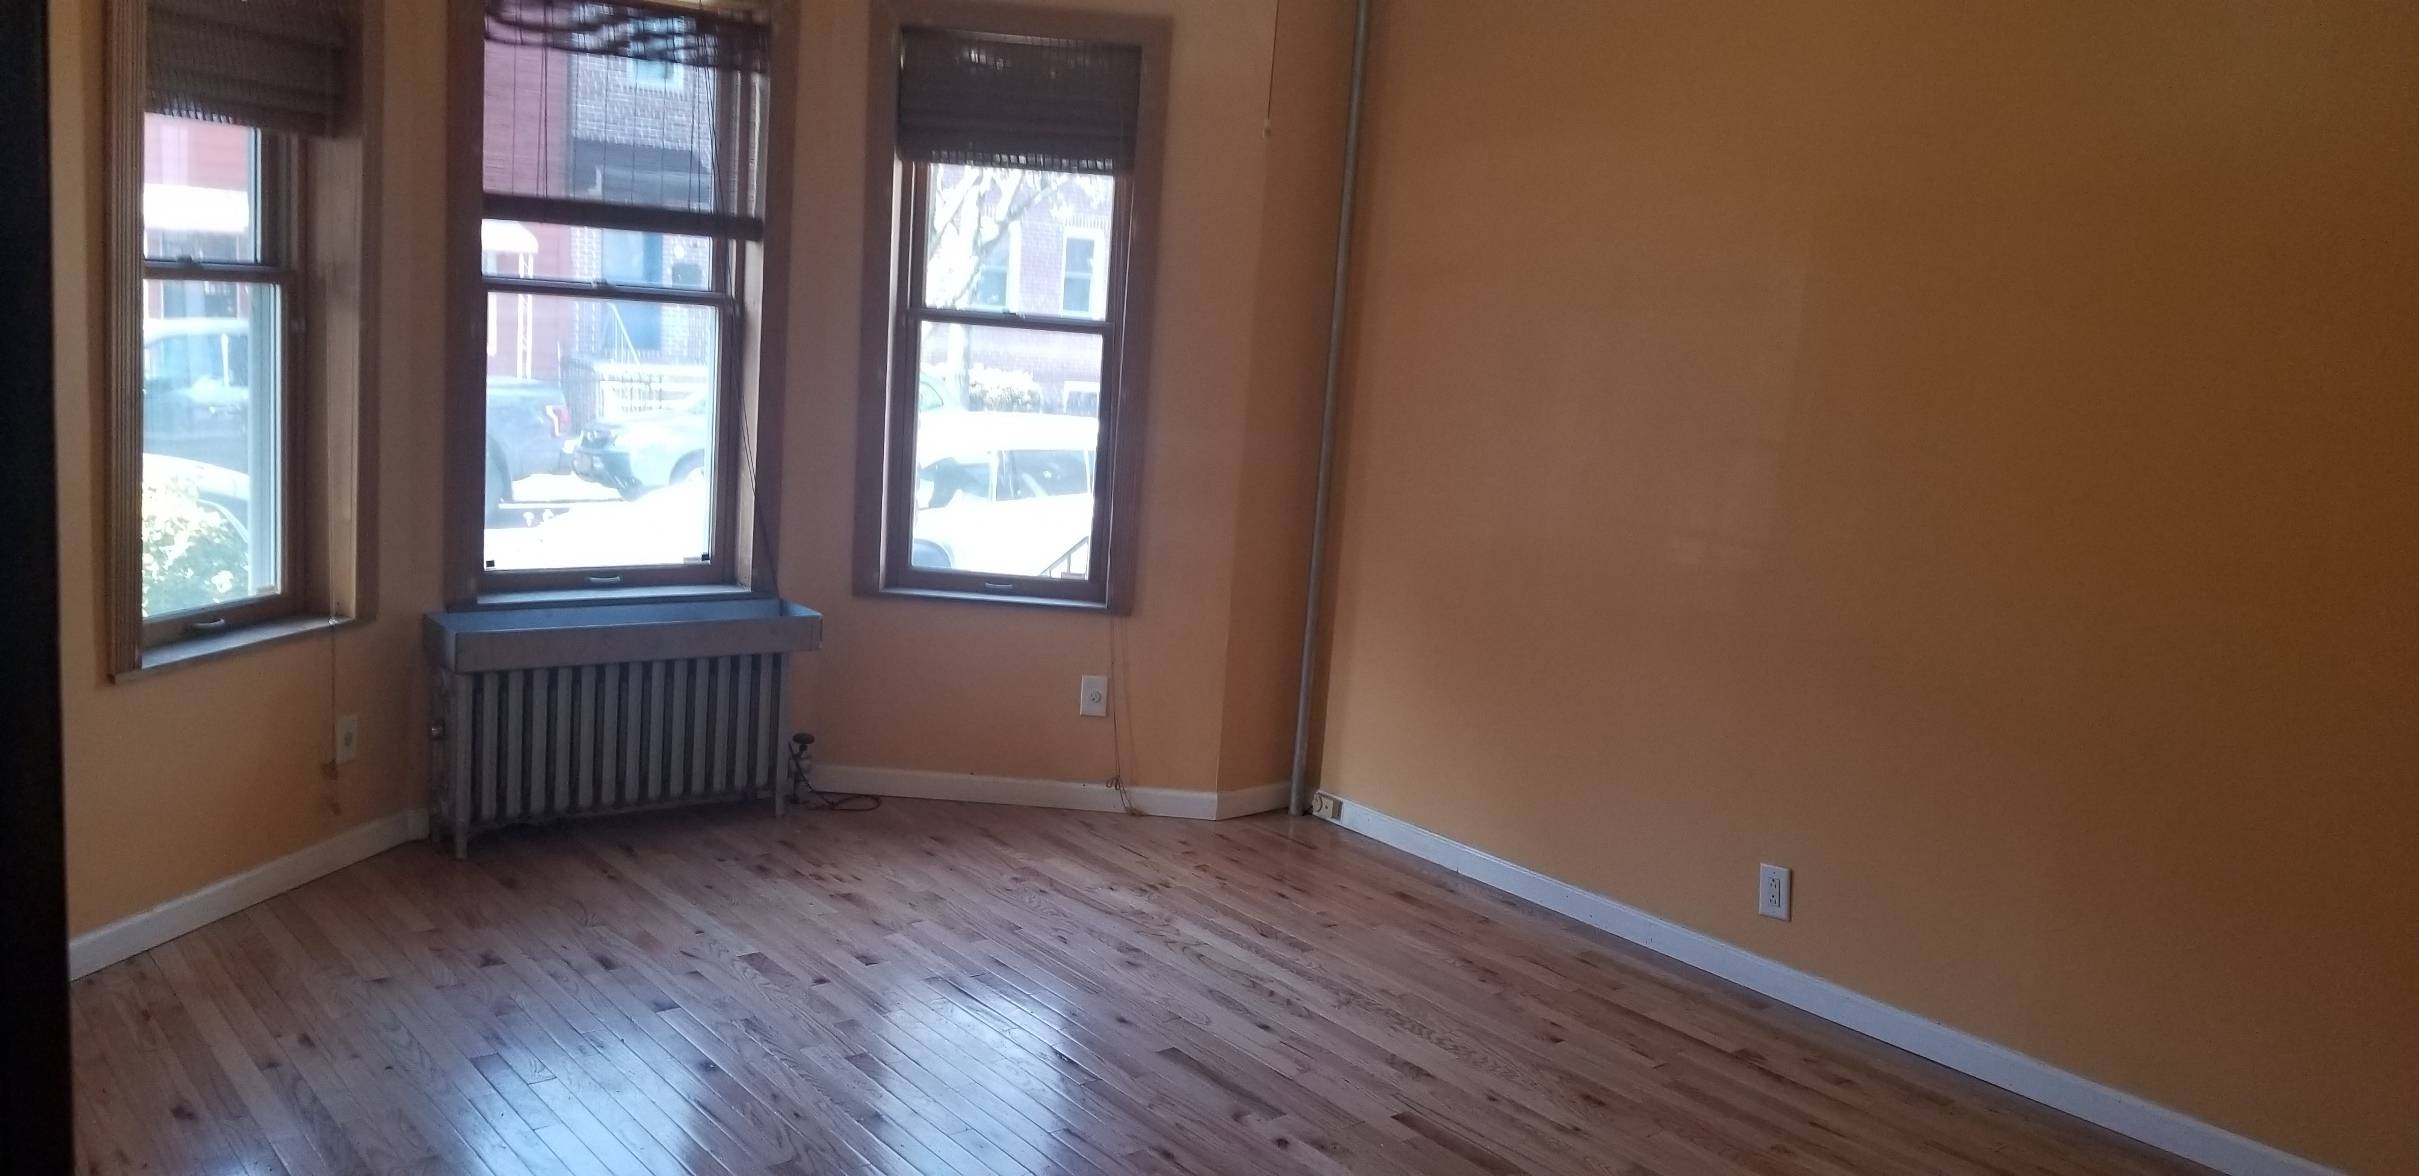 Newly renovated four room apartment in Windsor Terrace.